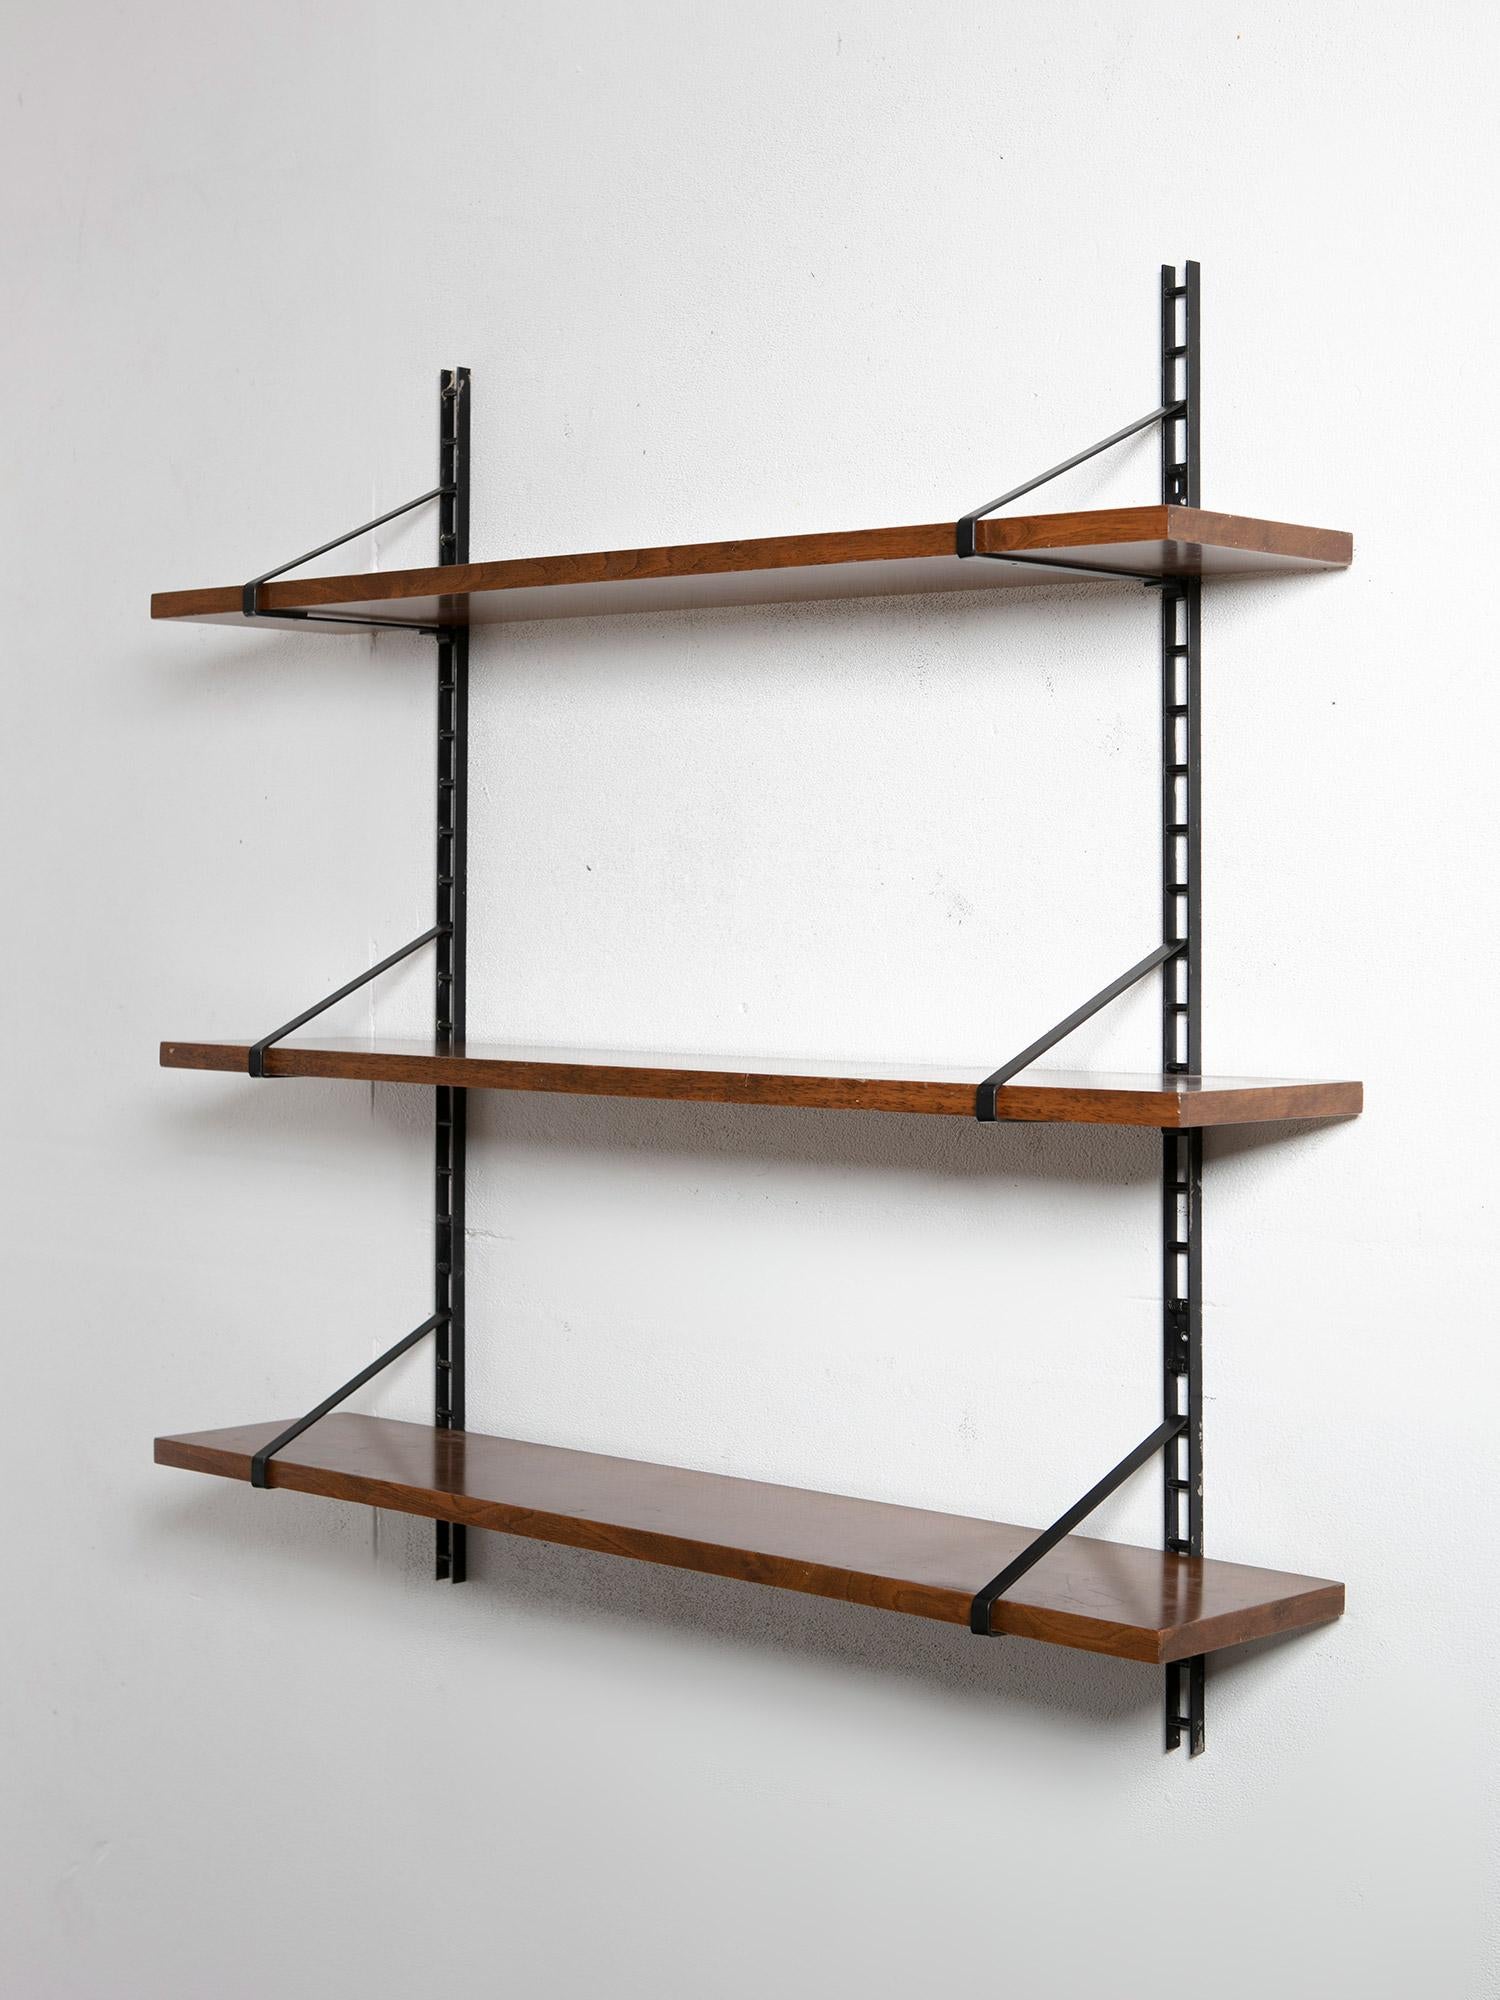 Modular wall shelving piece featuring two wall tracks and three adjustable shelves.